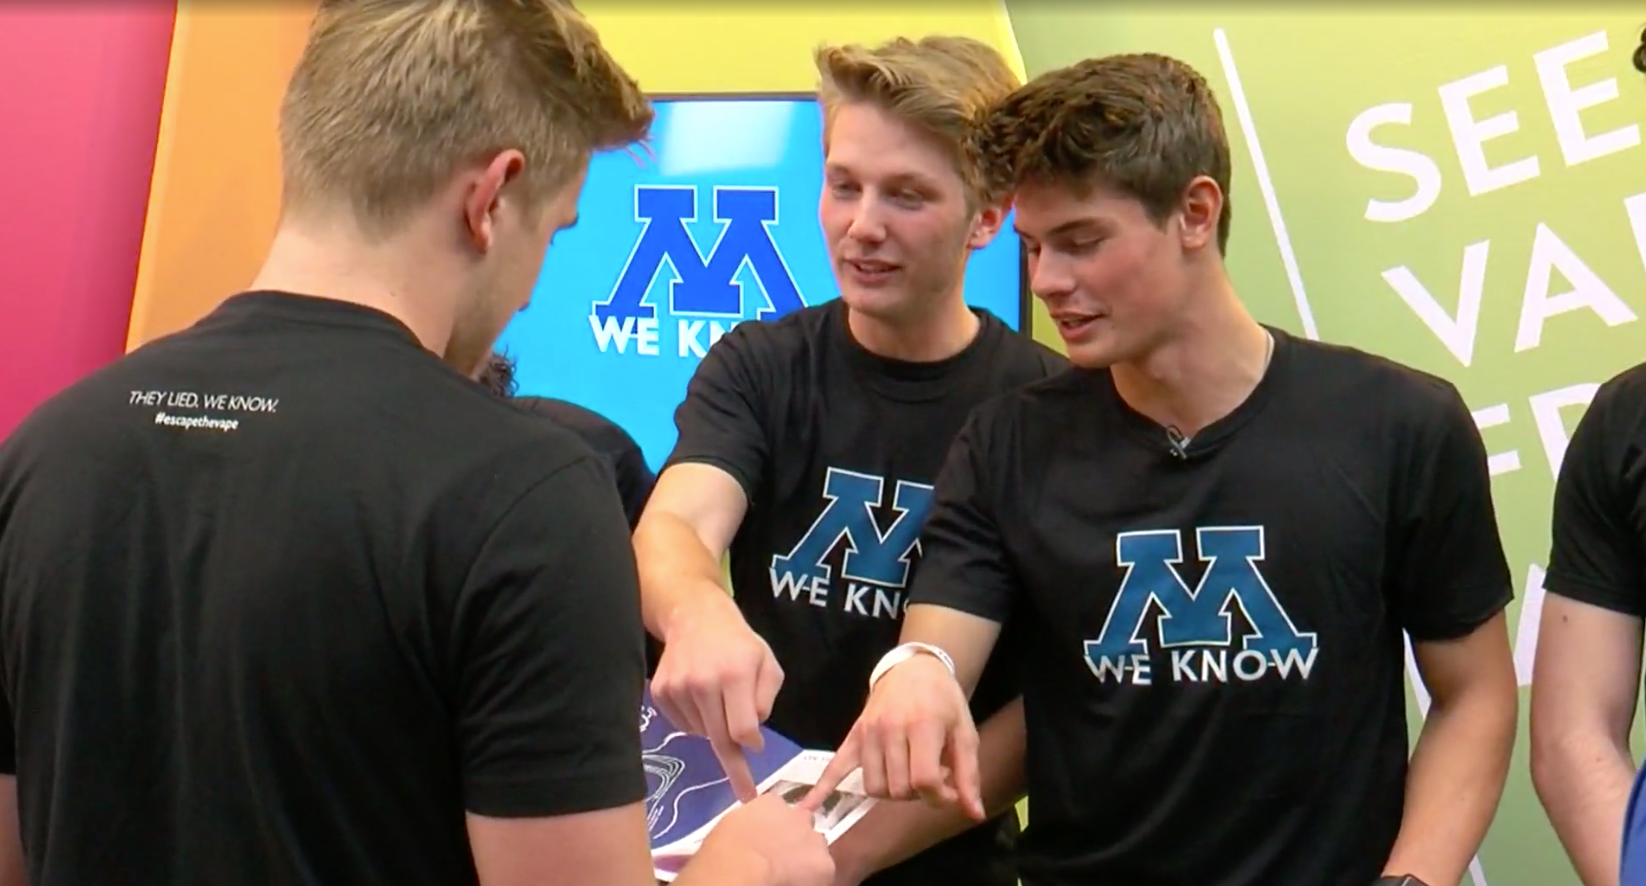 ‘I Don’t Want Anyone To Die From This’: Minnetonka Students Encouraging Each Other To #EscapeTheVape